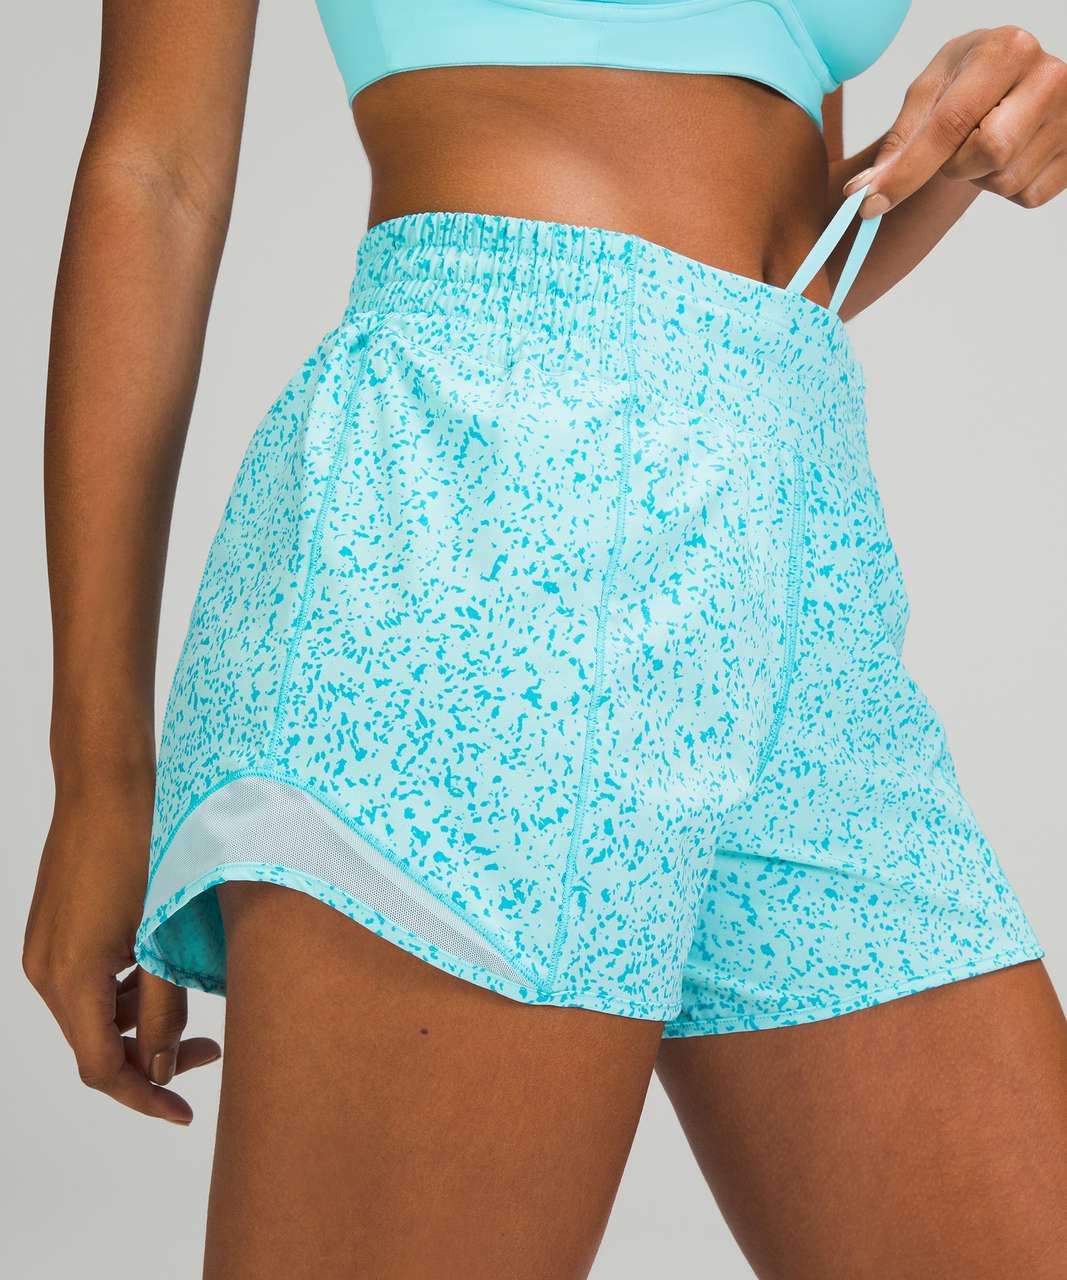 Lululemon SeaWheeze Hotty Hot High-Rise Lined Short 4" - Outer Pace Speckle Cyan Blue Turquoise Tide / Icing Blue